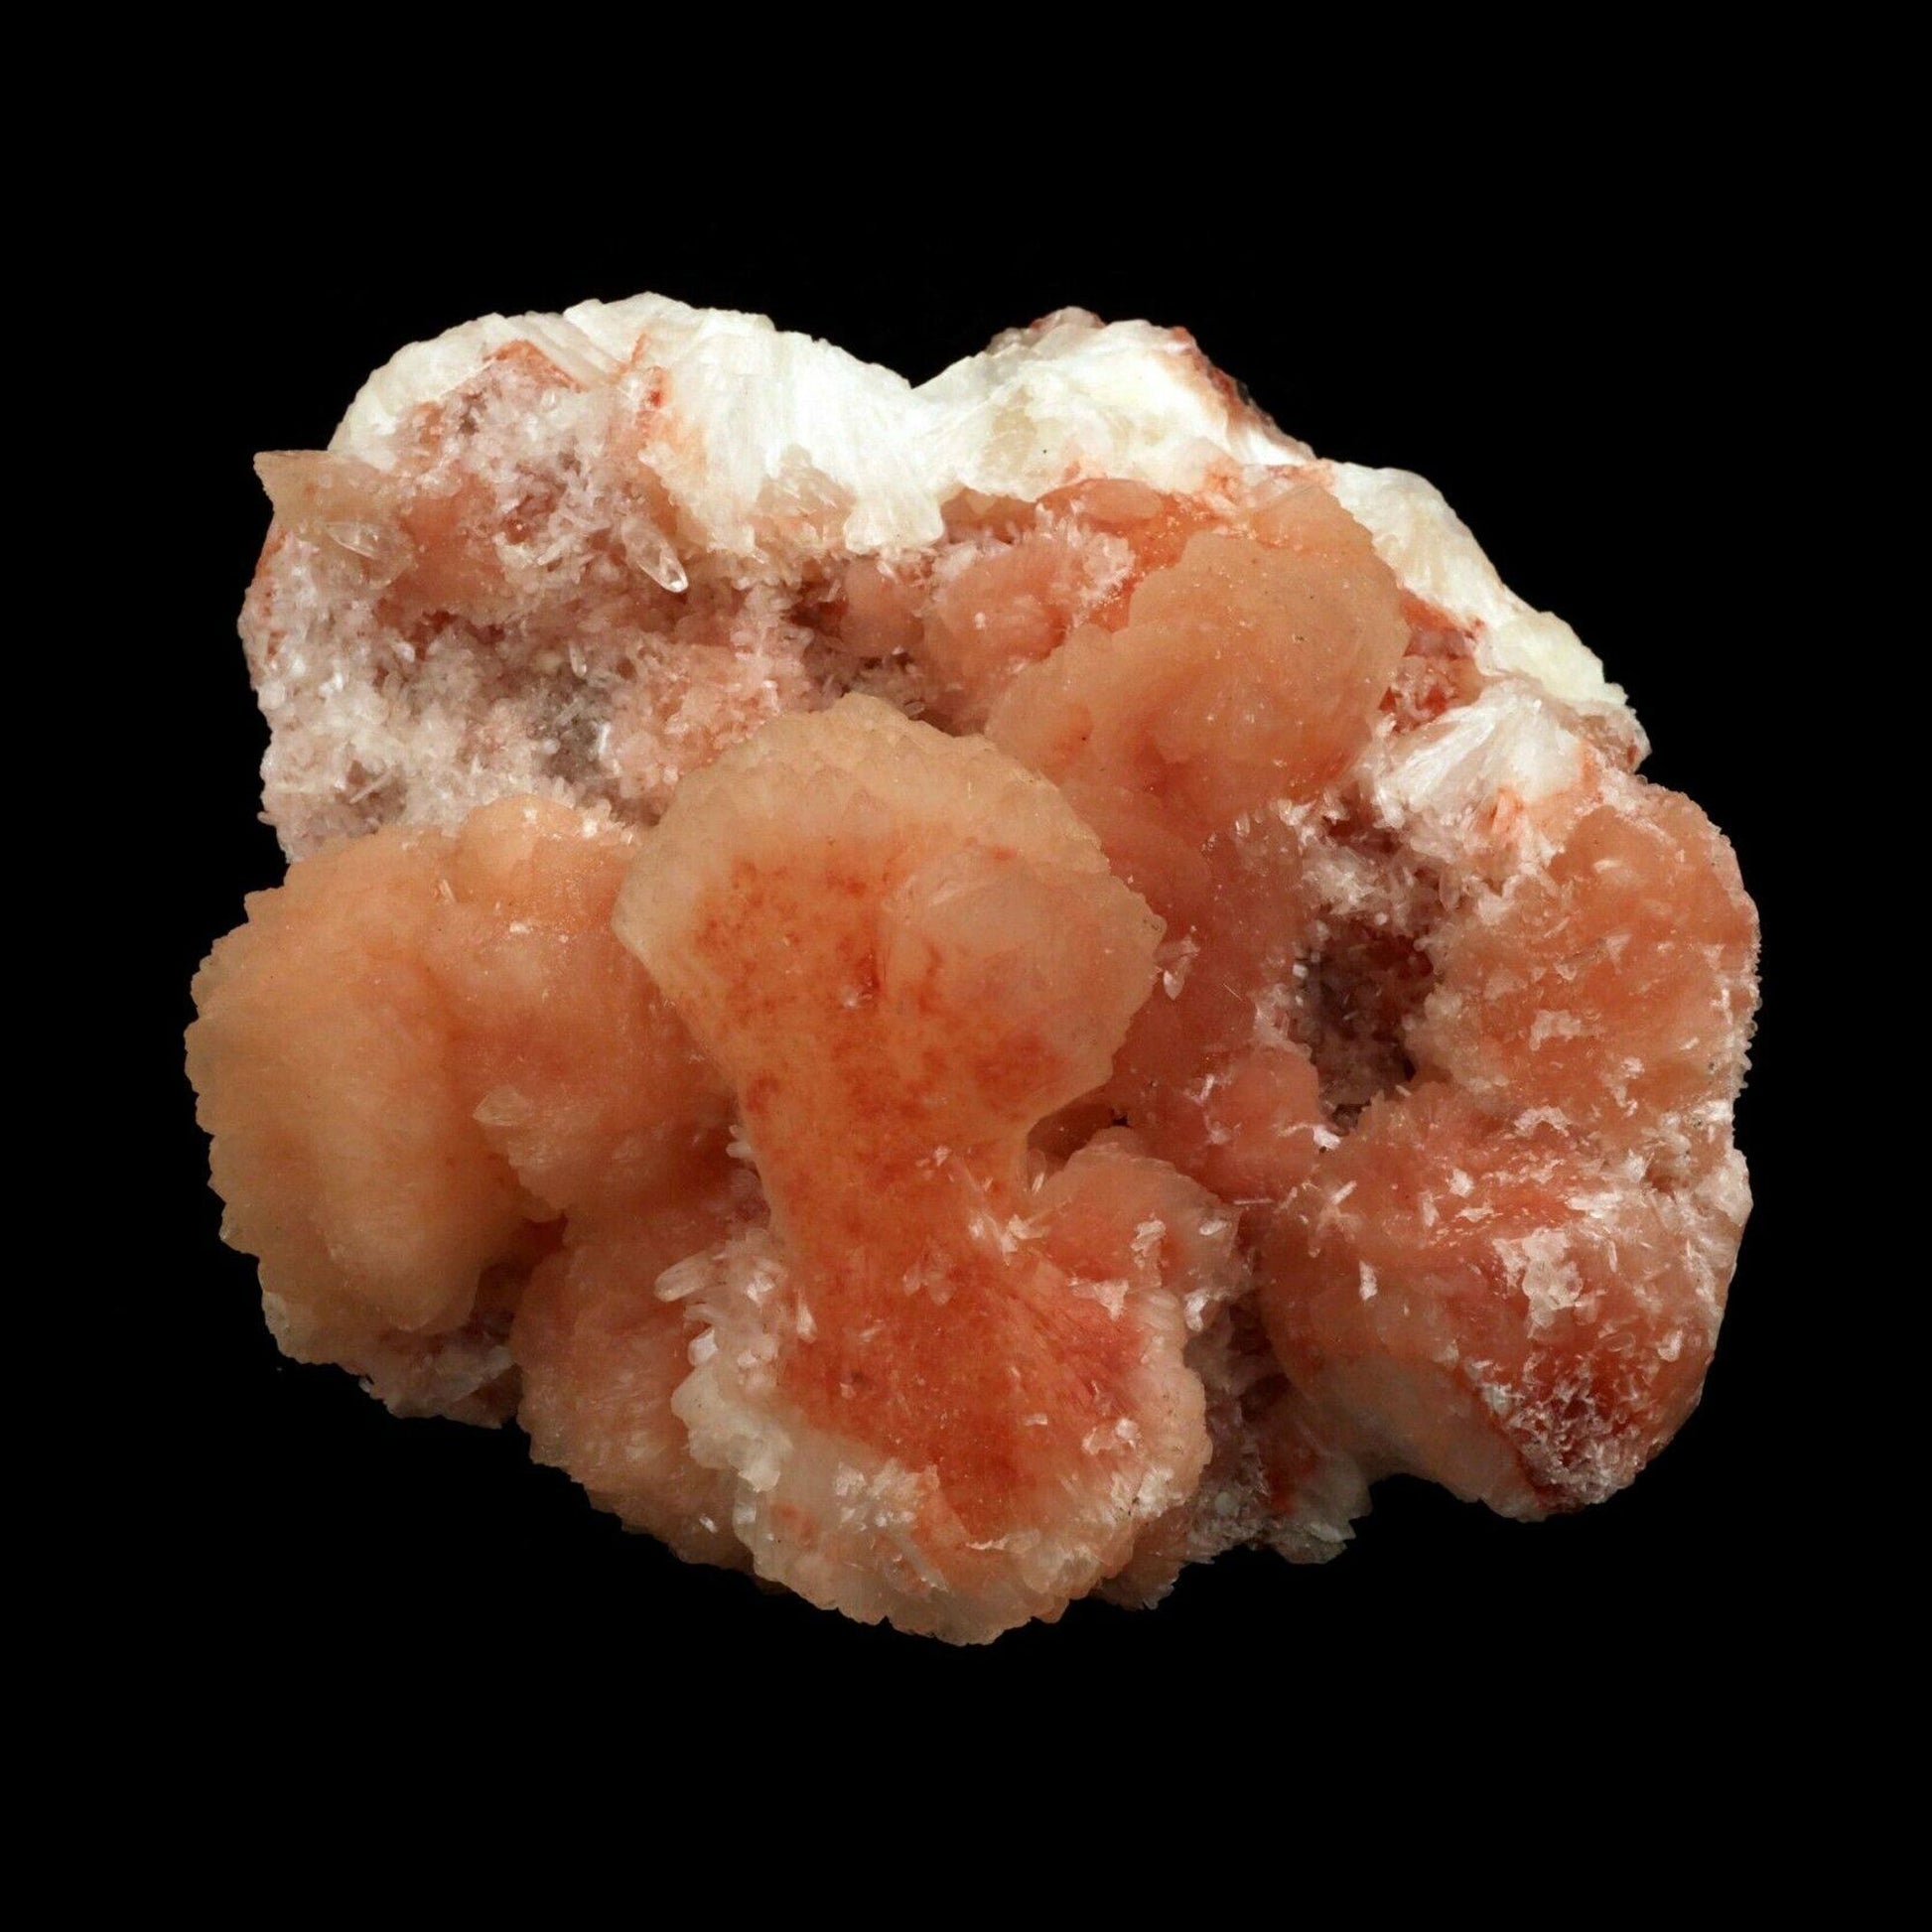 Stilbite Bow Shape Pink crystal Natural Mineral Specimen # B 2892  https://www.superbminerals.us/products/stilbite-bow-shape-pink-crystal-natural-mineral-specimen-b-2892  Features:It features a large aggregate of numerous “bowtie” shaped, translucent and lustrous pink/oramge colored Stilbite crystals. The color of this Stilbite is not exactly the atypical salmon color, but as mentioned, it has a slight pink,orange hue to it that makes it a bit more unique. Primary Mineral(s): Stilbite